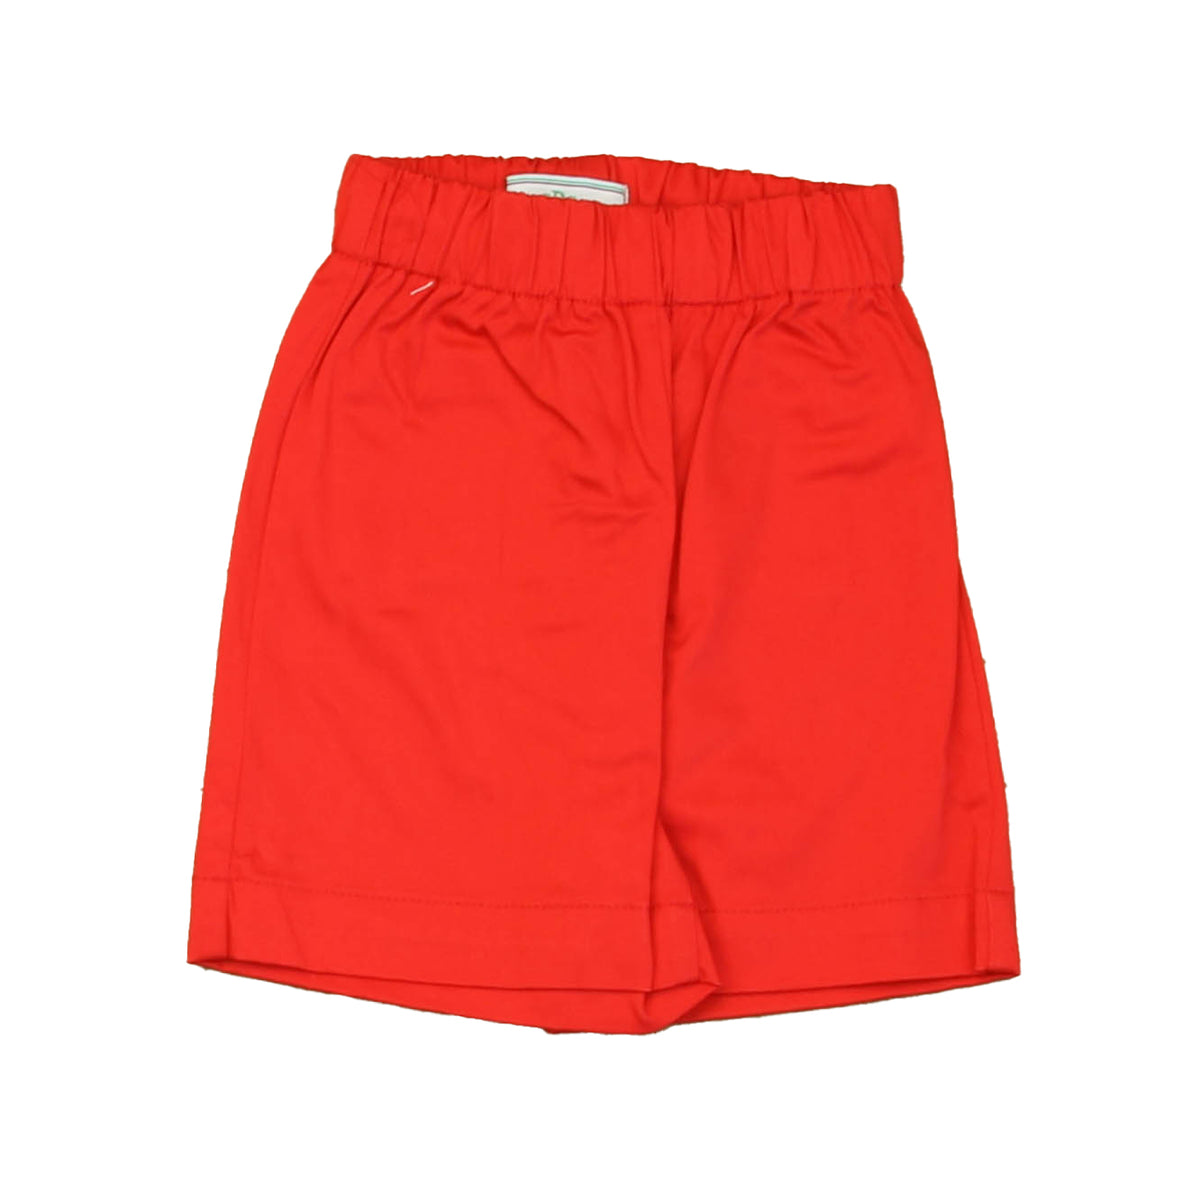 New with Tags: Lollipop Red Shorts -- FINAL SALE